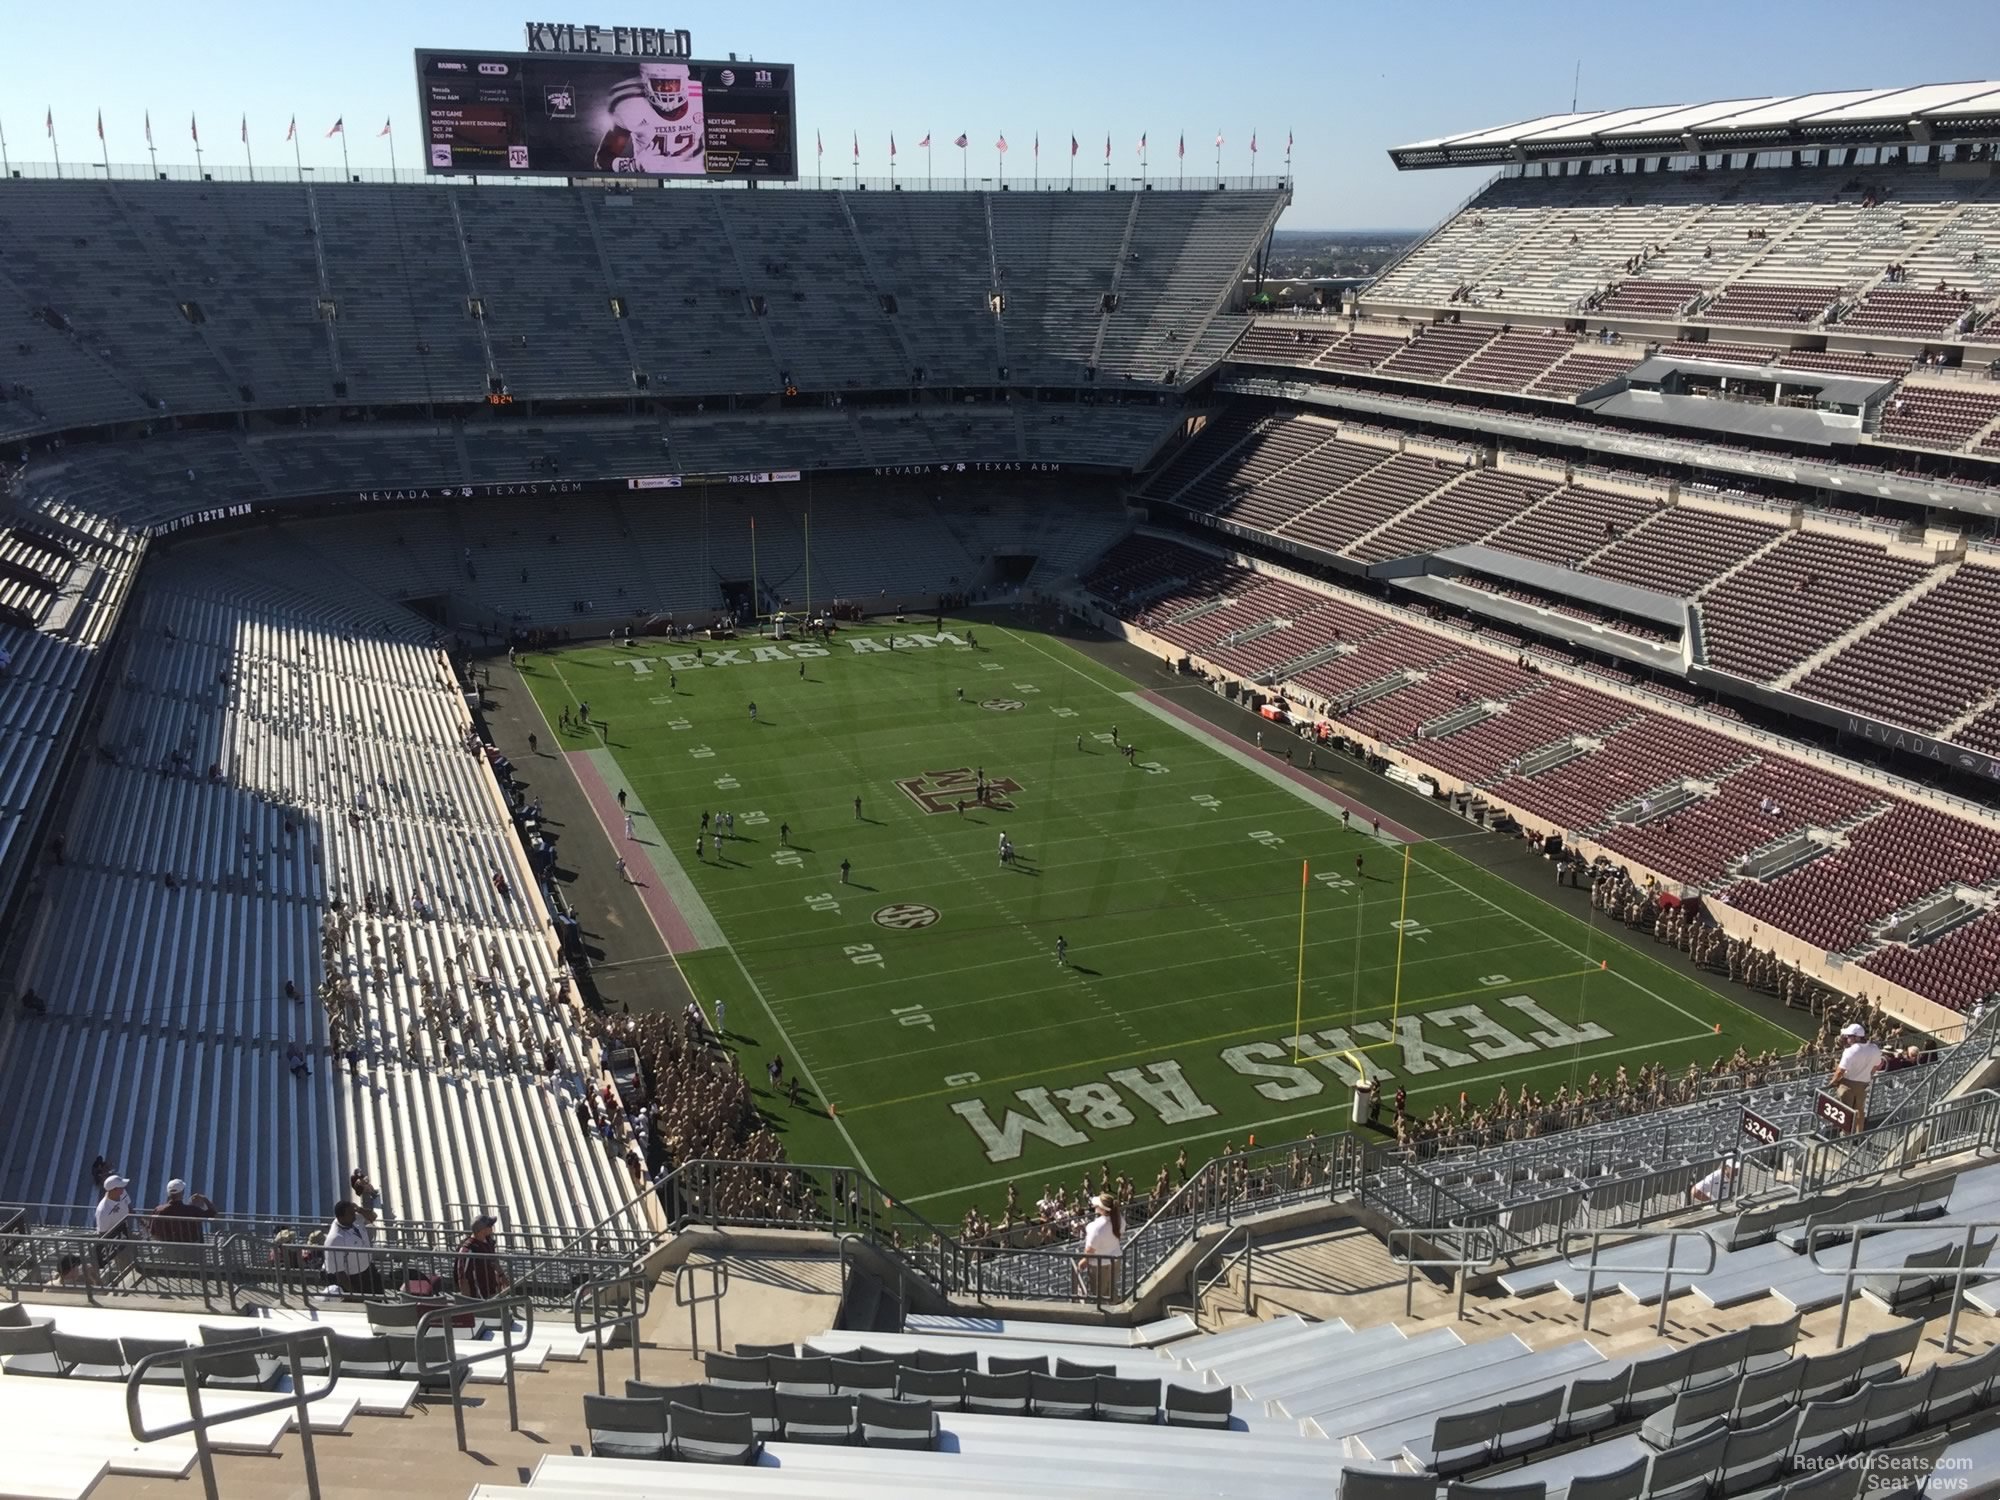 section 419, row 20 seat view  - kyle field